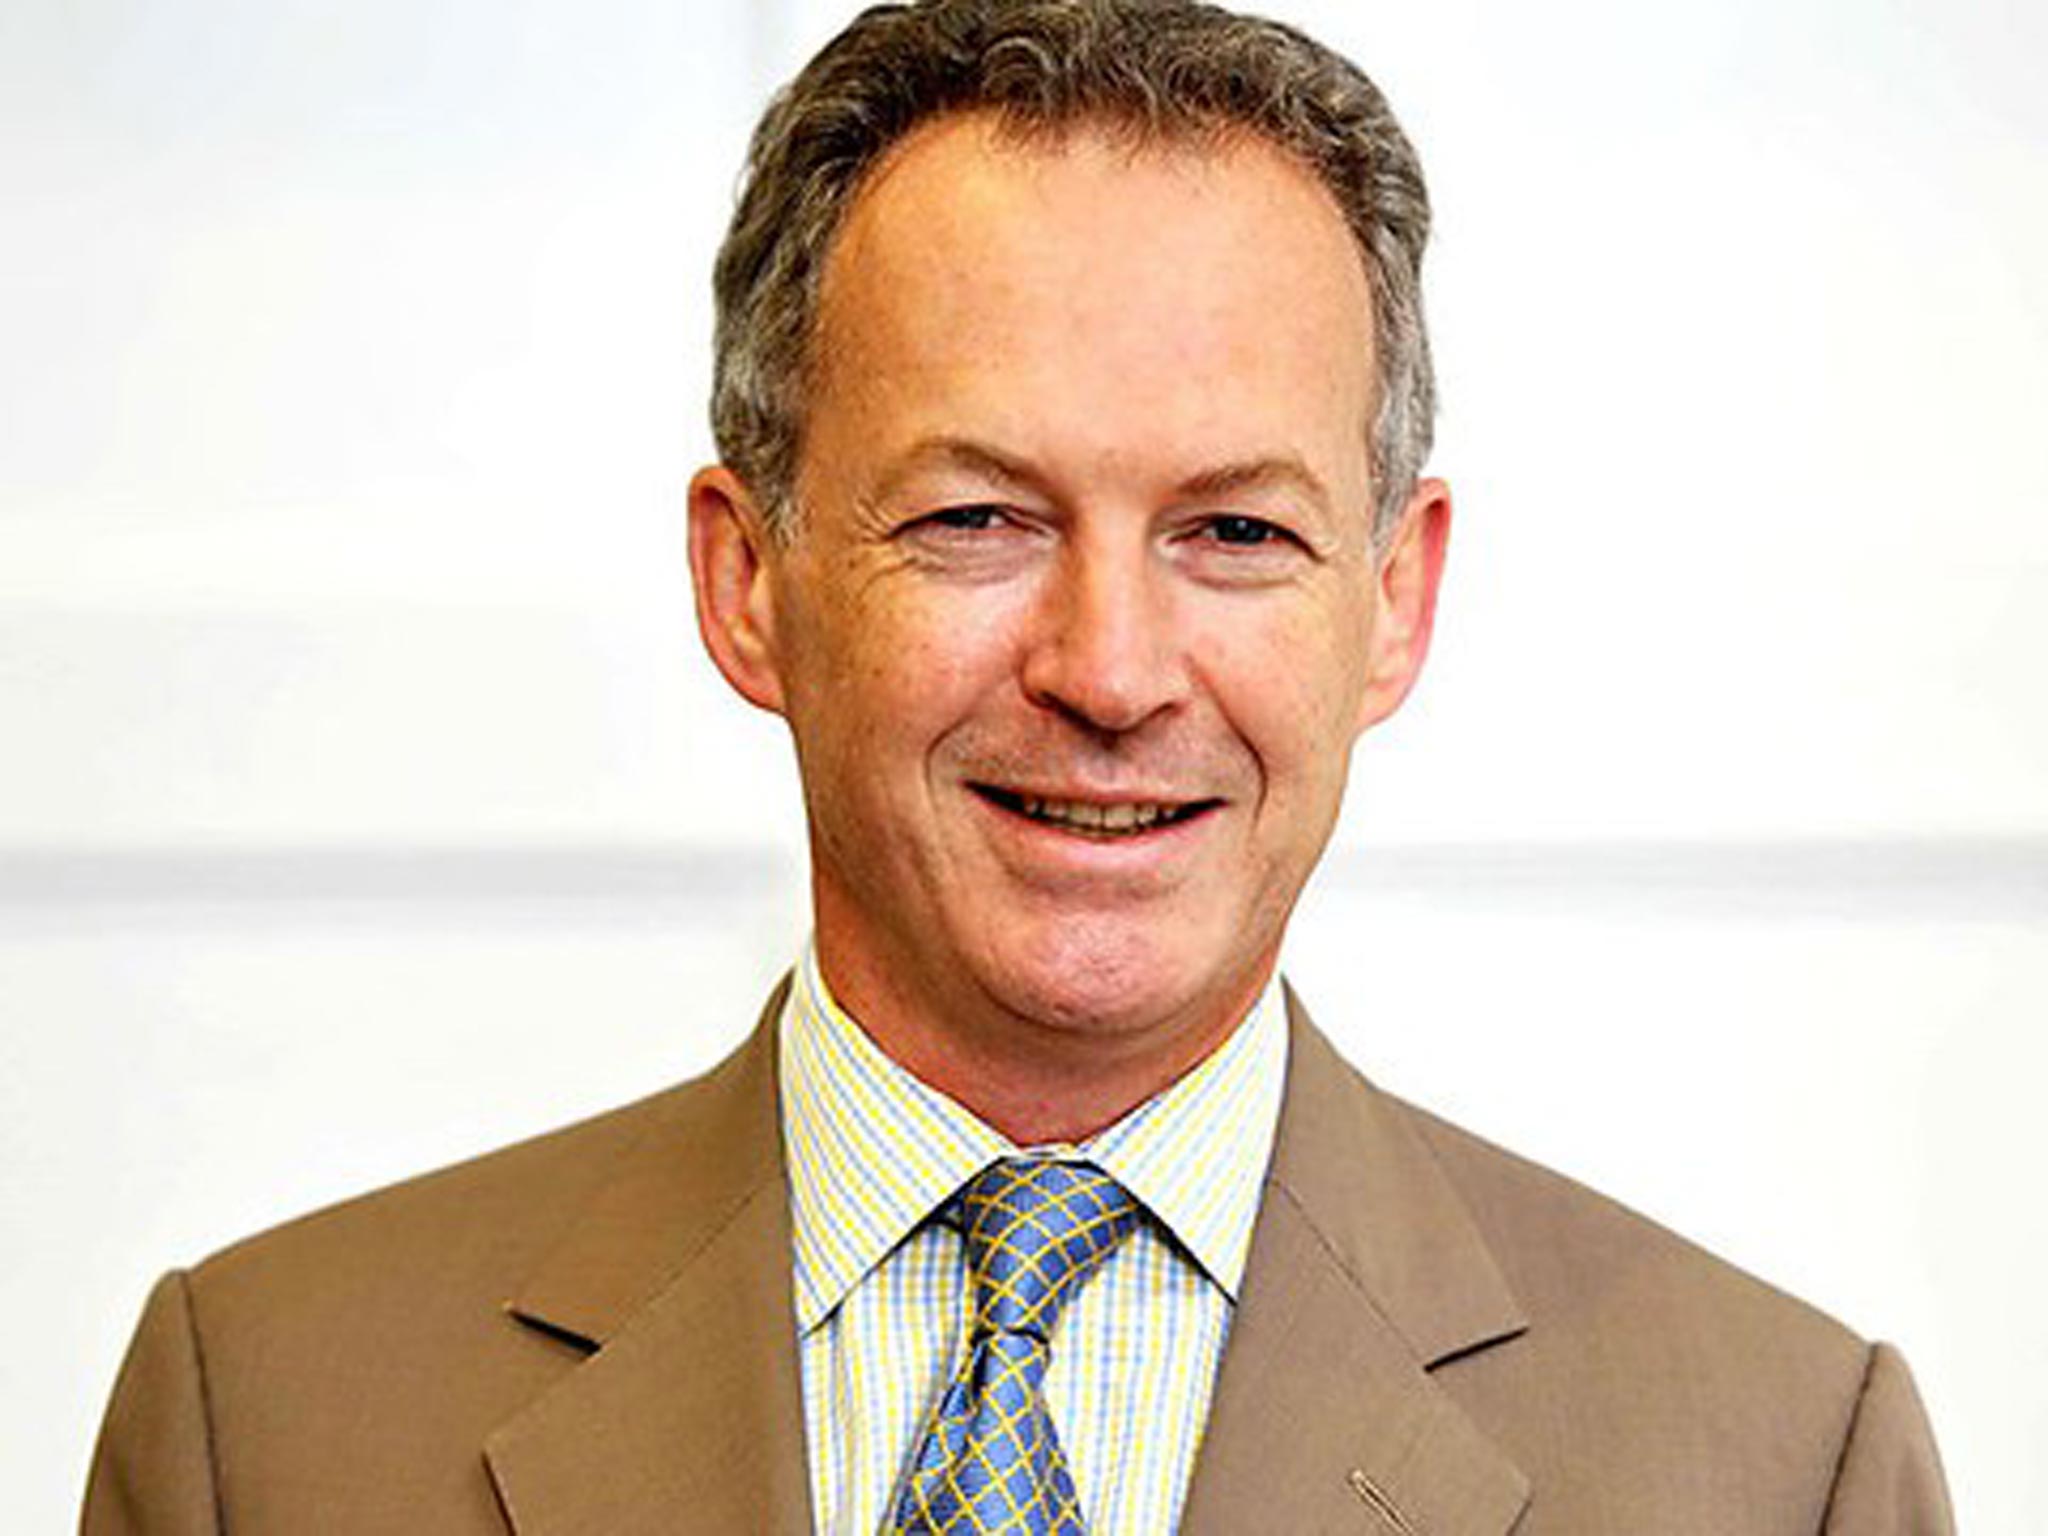 James Daunt, of Waterstones, said ‘We are not trying
to hoodwink people’